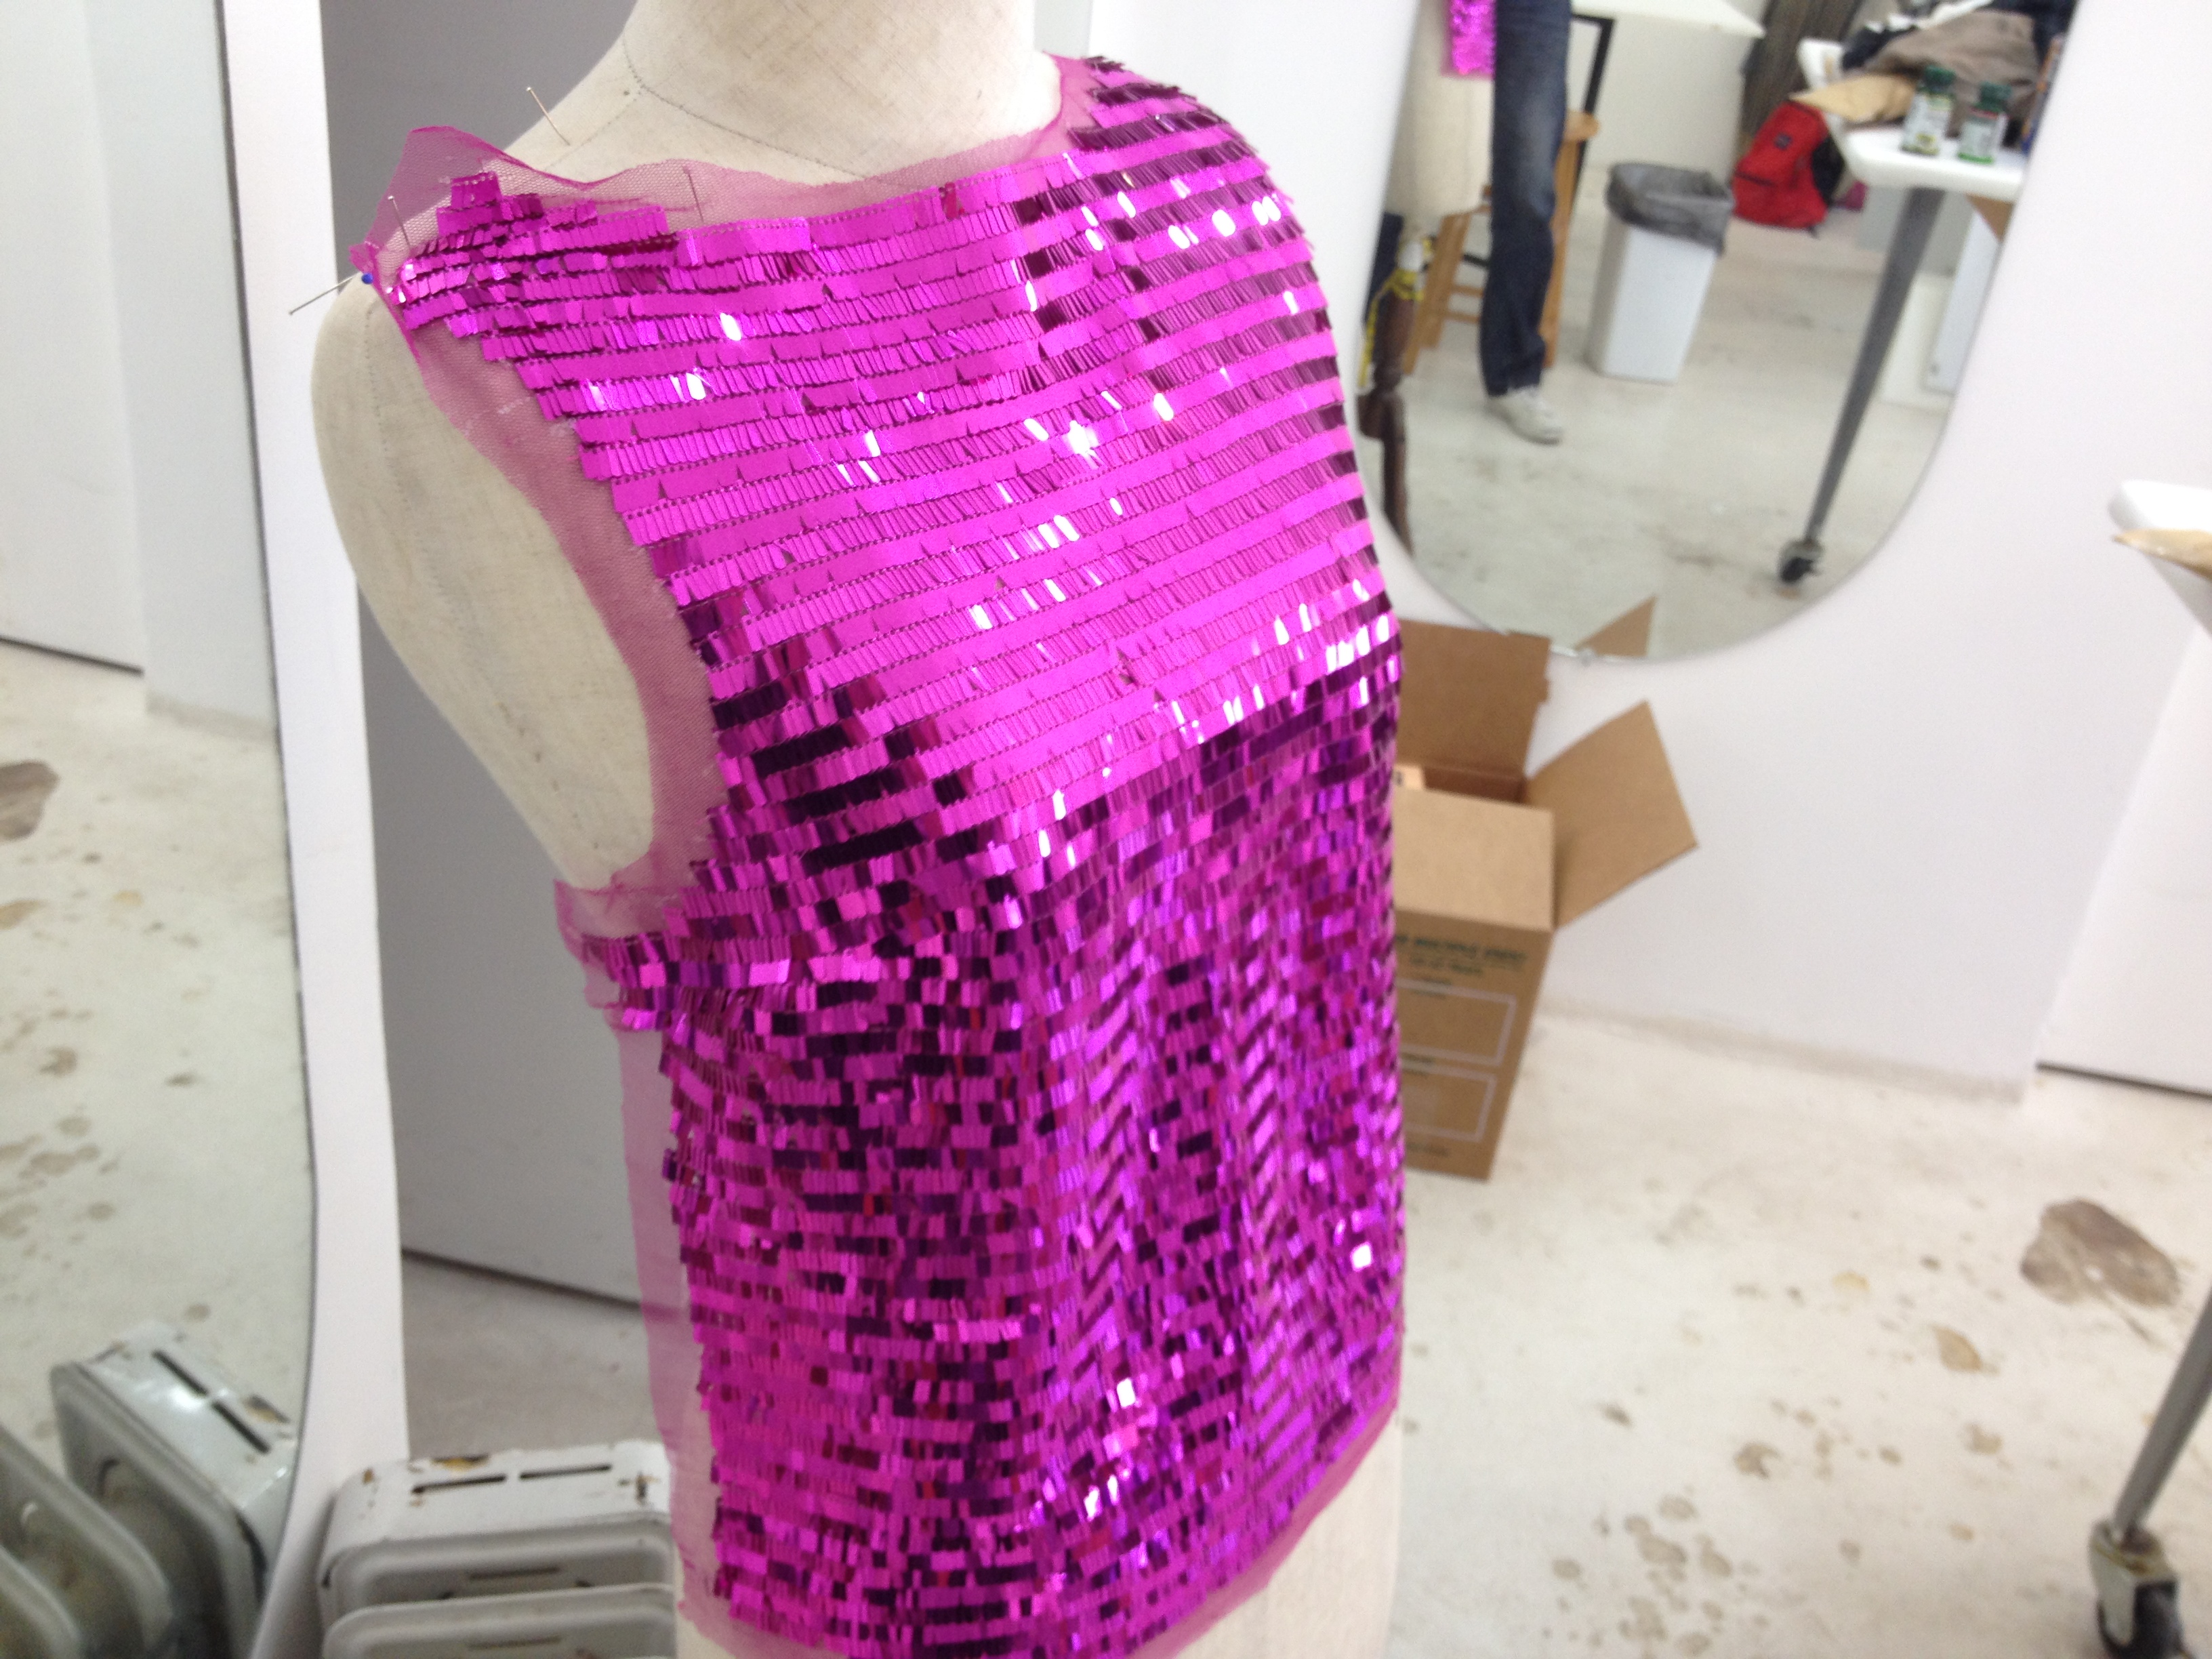 Sewing classes in chicago: tchad: workroom: stdio: christen: sequins: bodice: blouse: darts